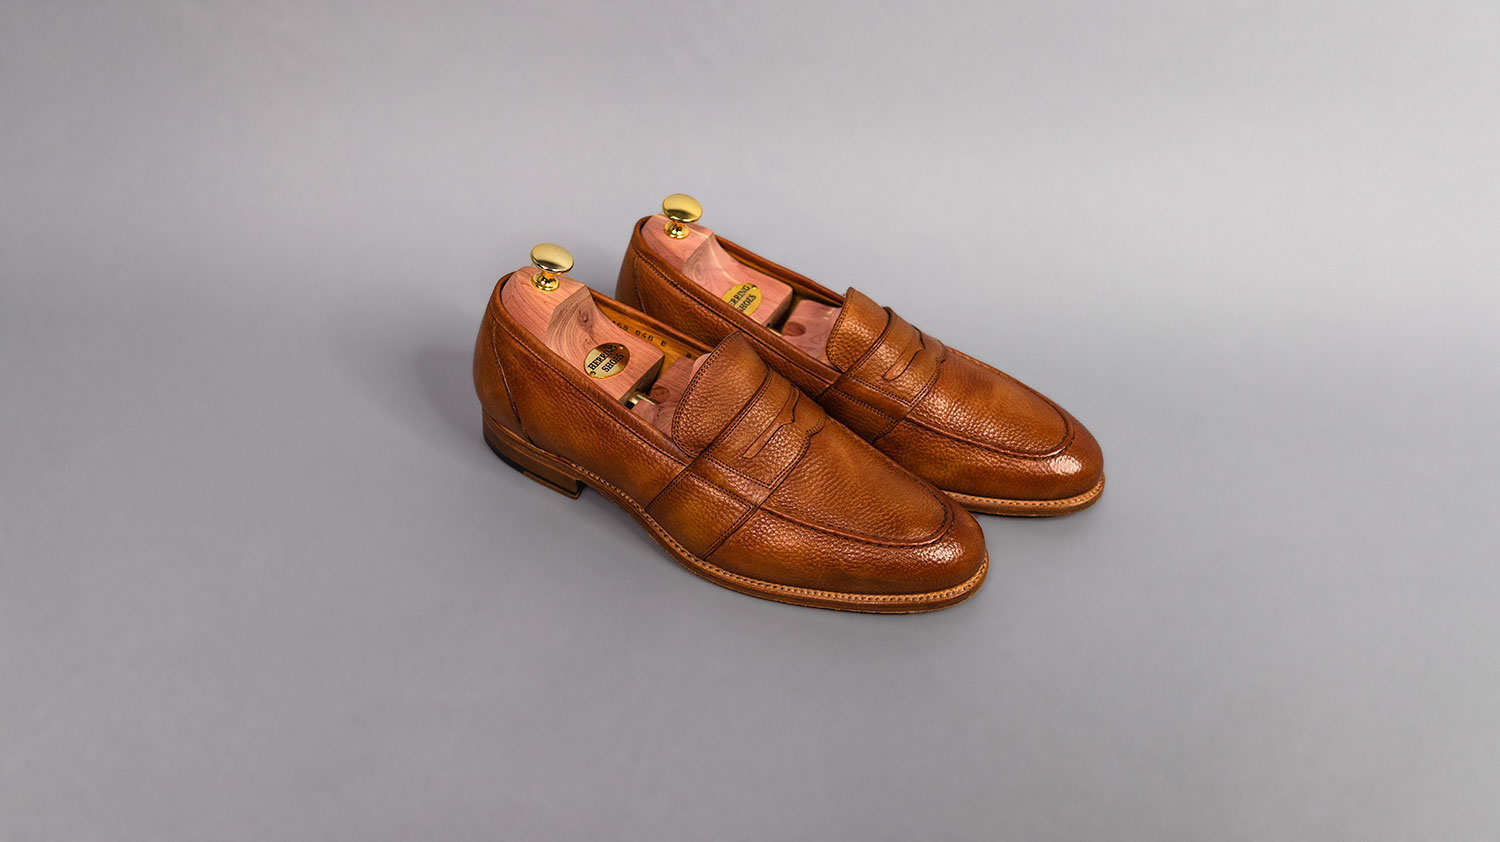 tan leather loafers from Herring on gray background